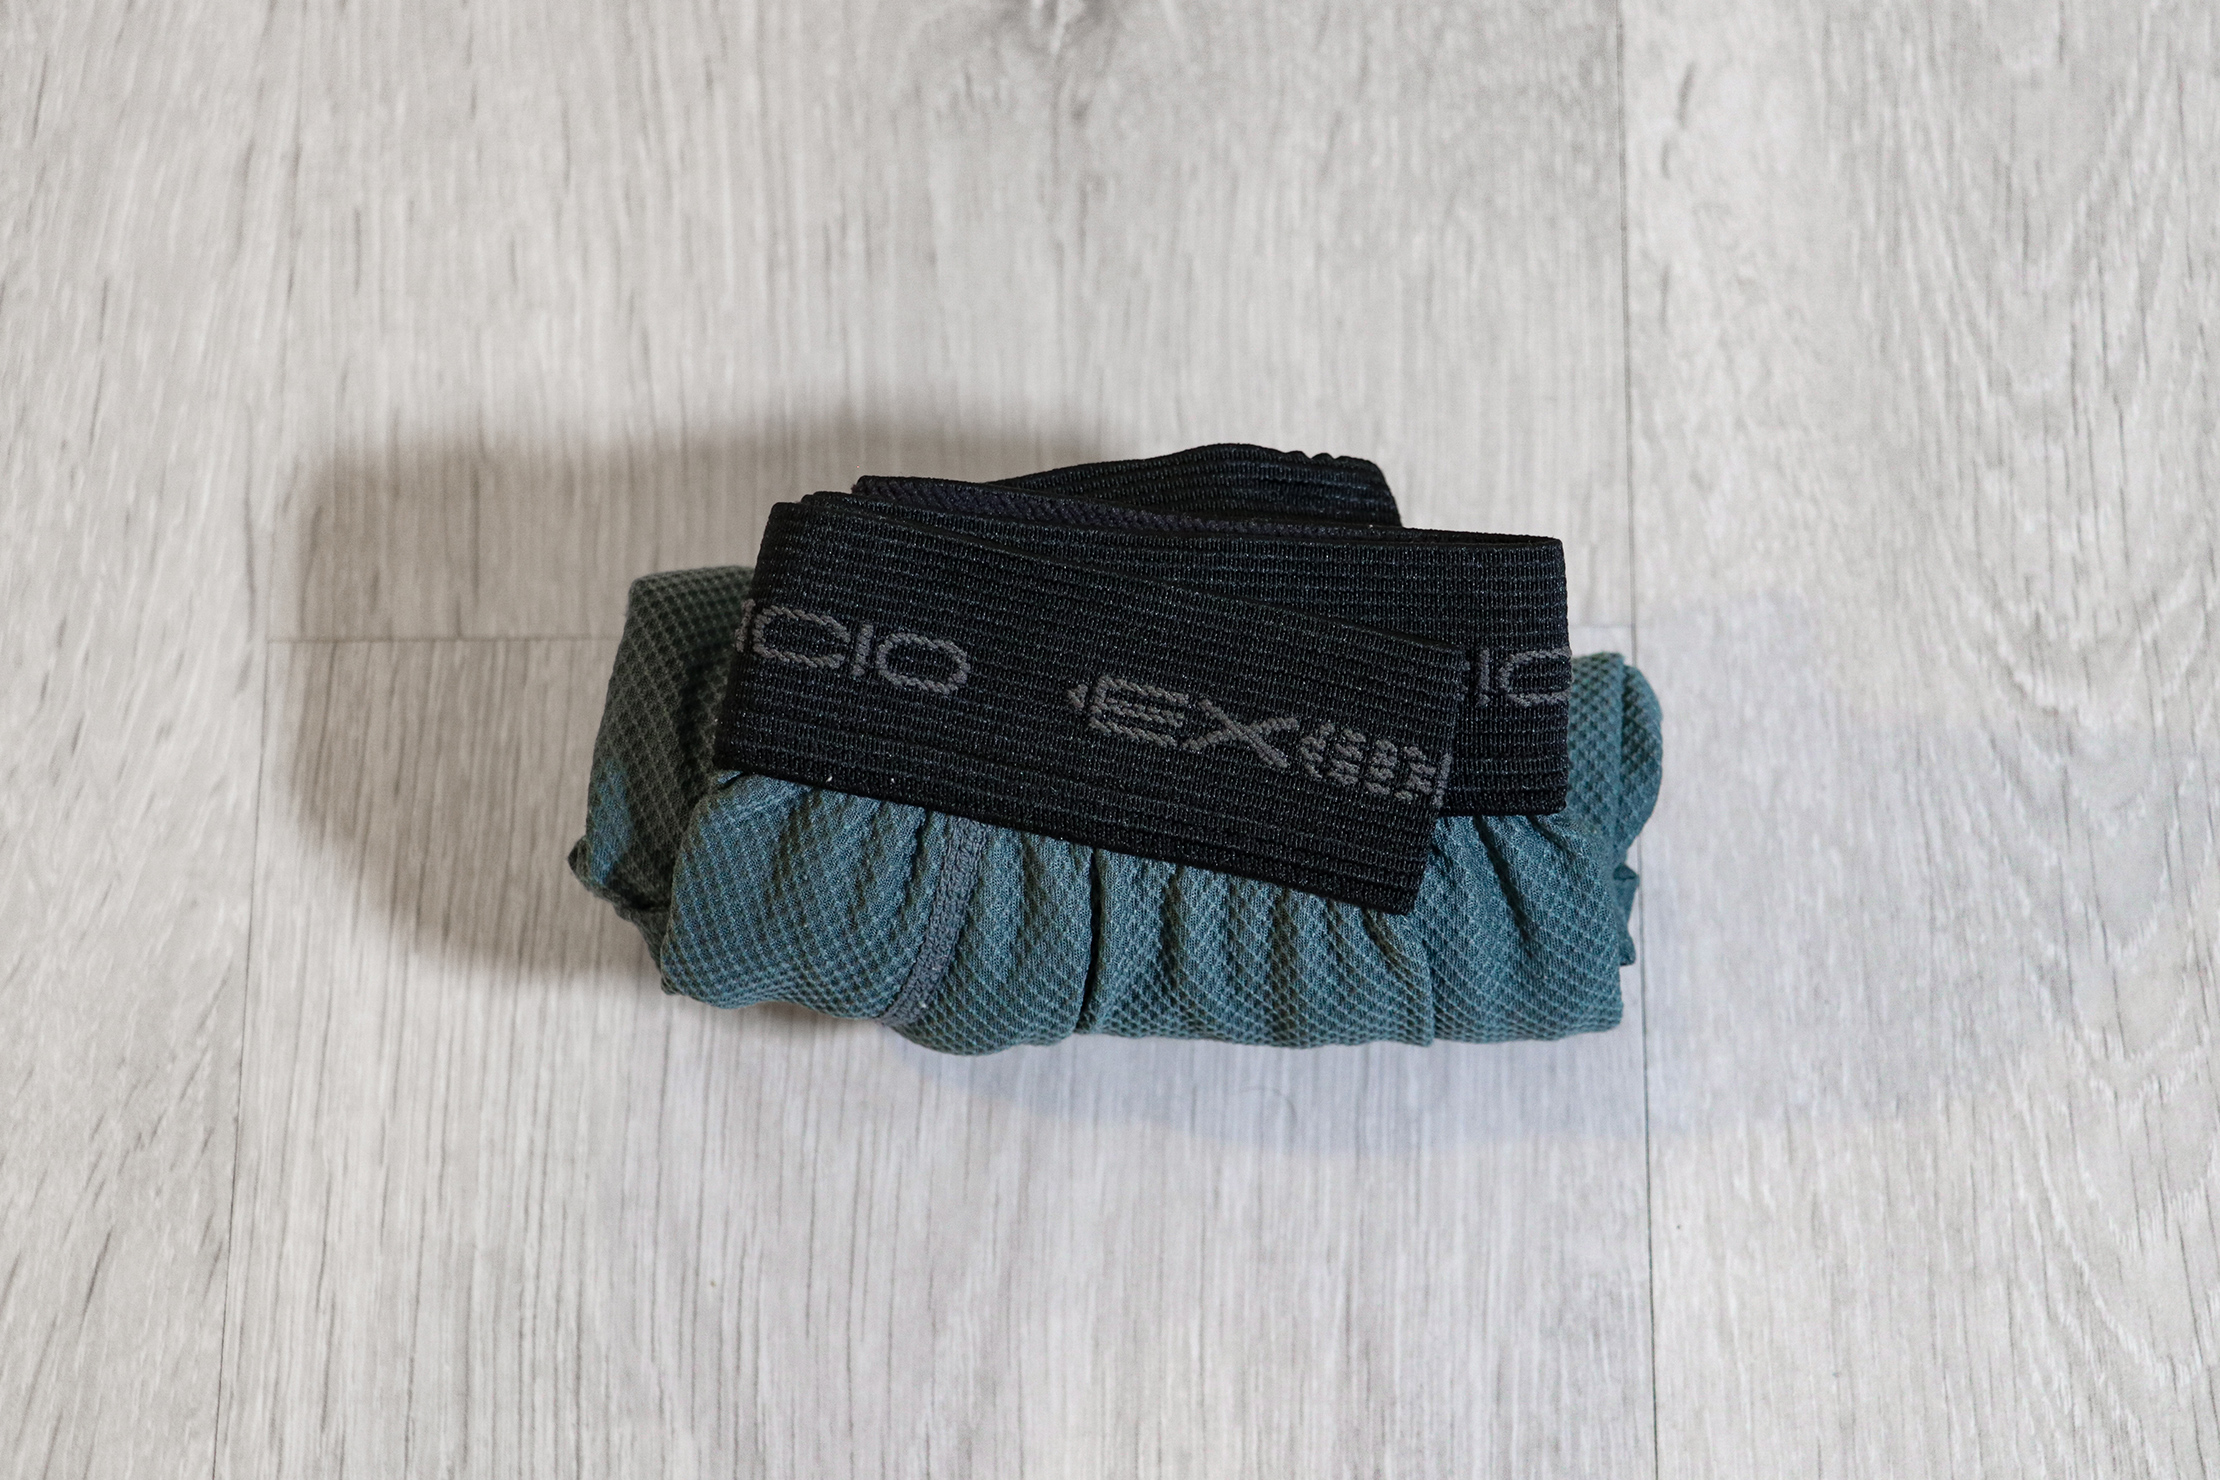 ExOfficio Boxer Brief (Give-N-Go) Rolled Up